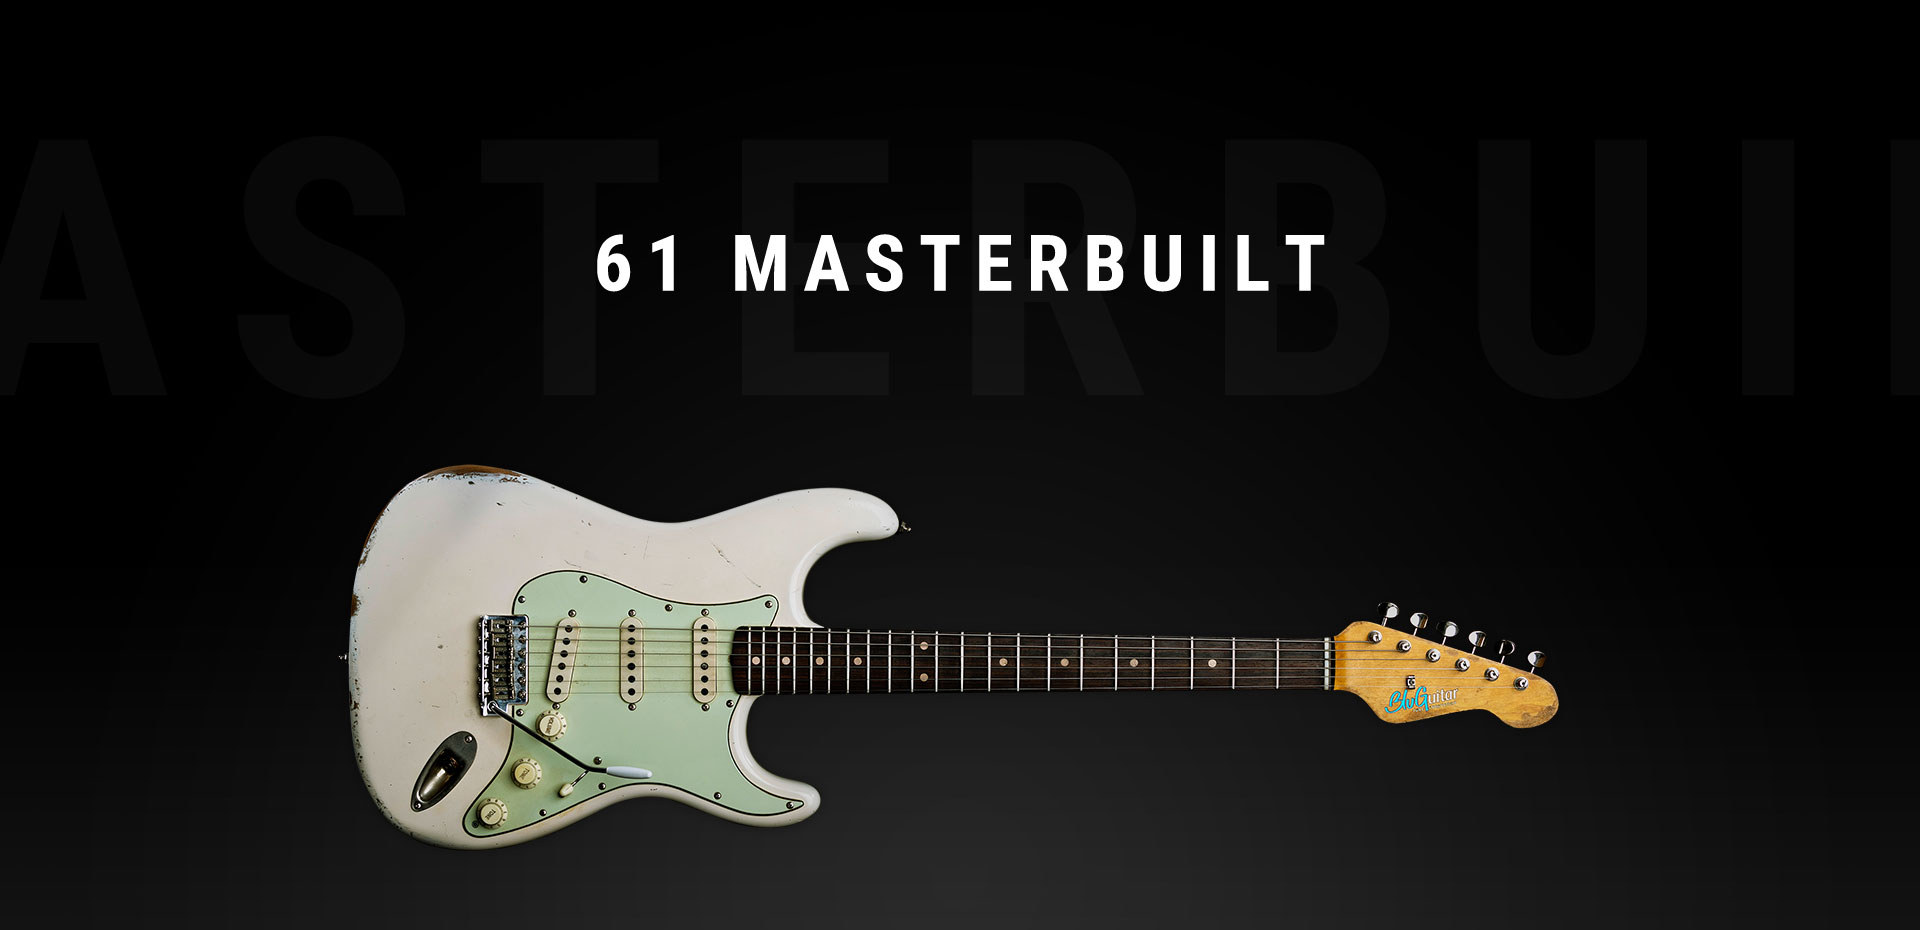 Learn more about the BluGuitar 61 Masterbuilt